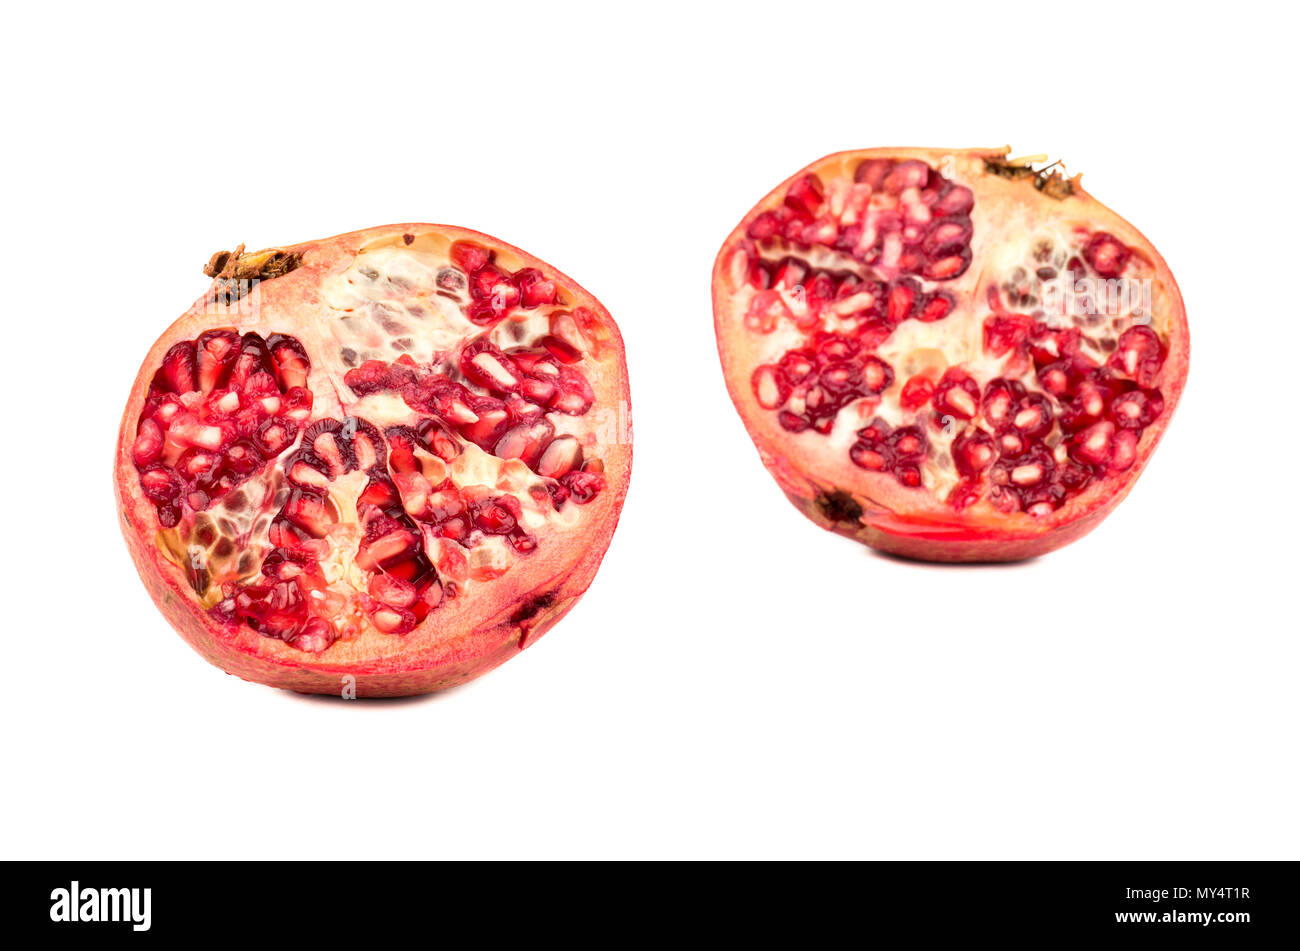 Two halves of juicy pomegranate isolated on white background Stock Photo